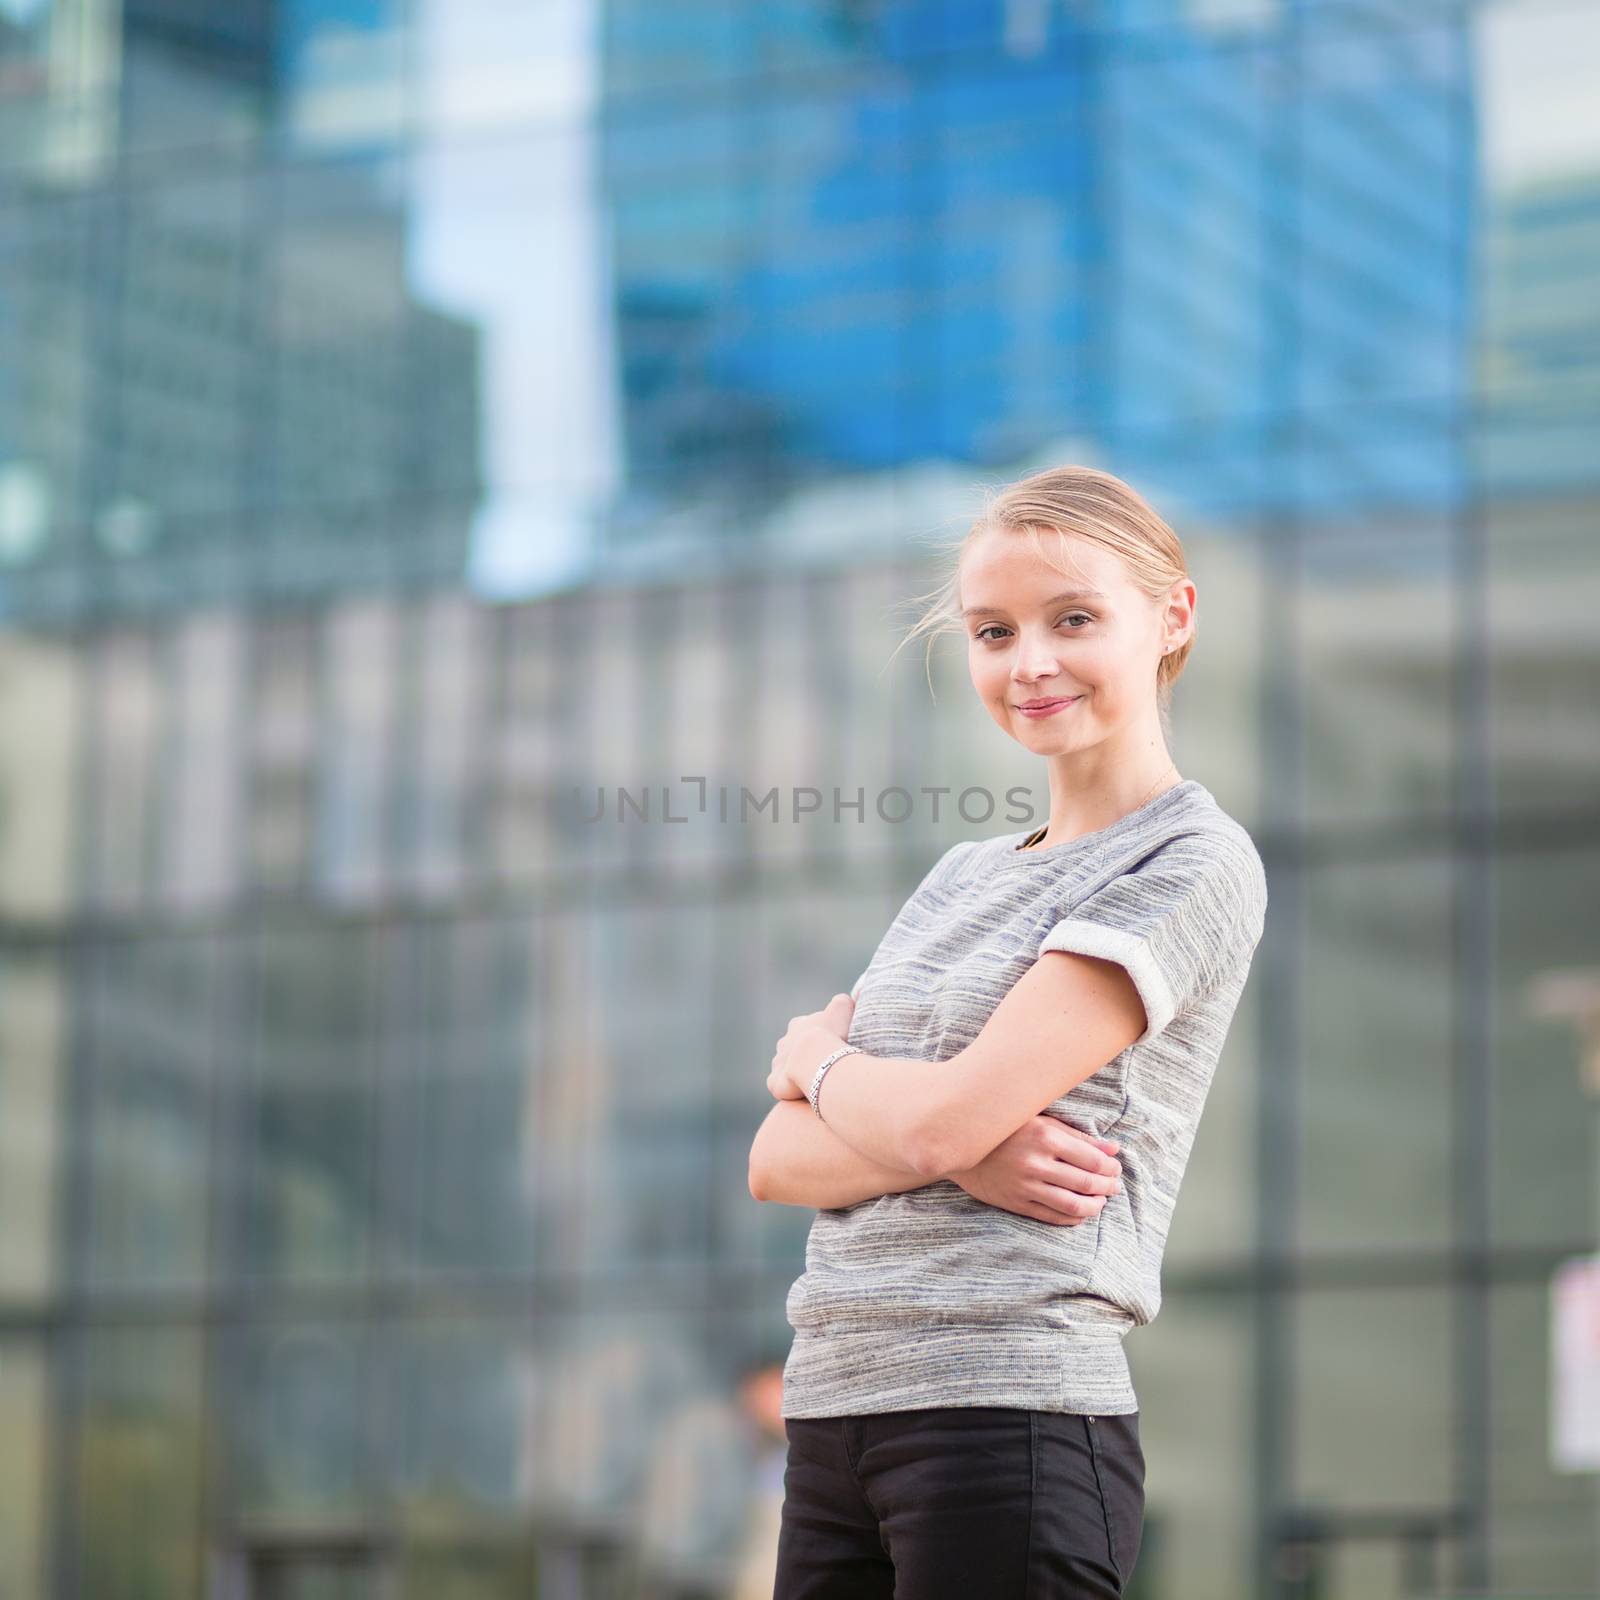 Smiling young woman in modern glass office interior